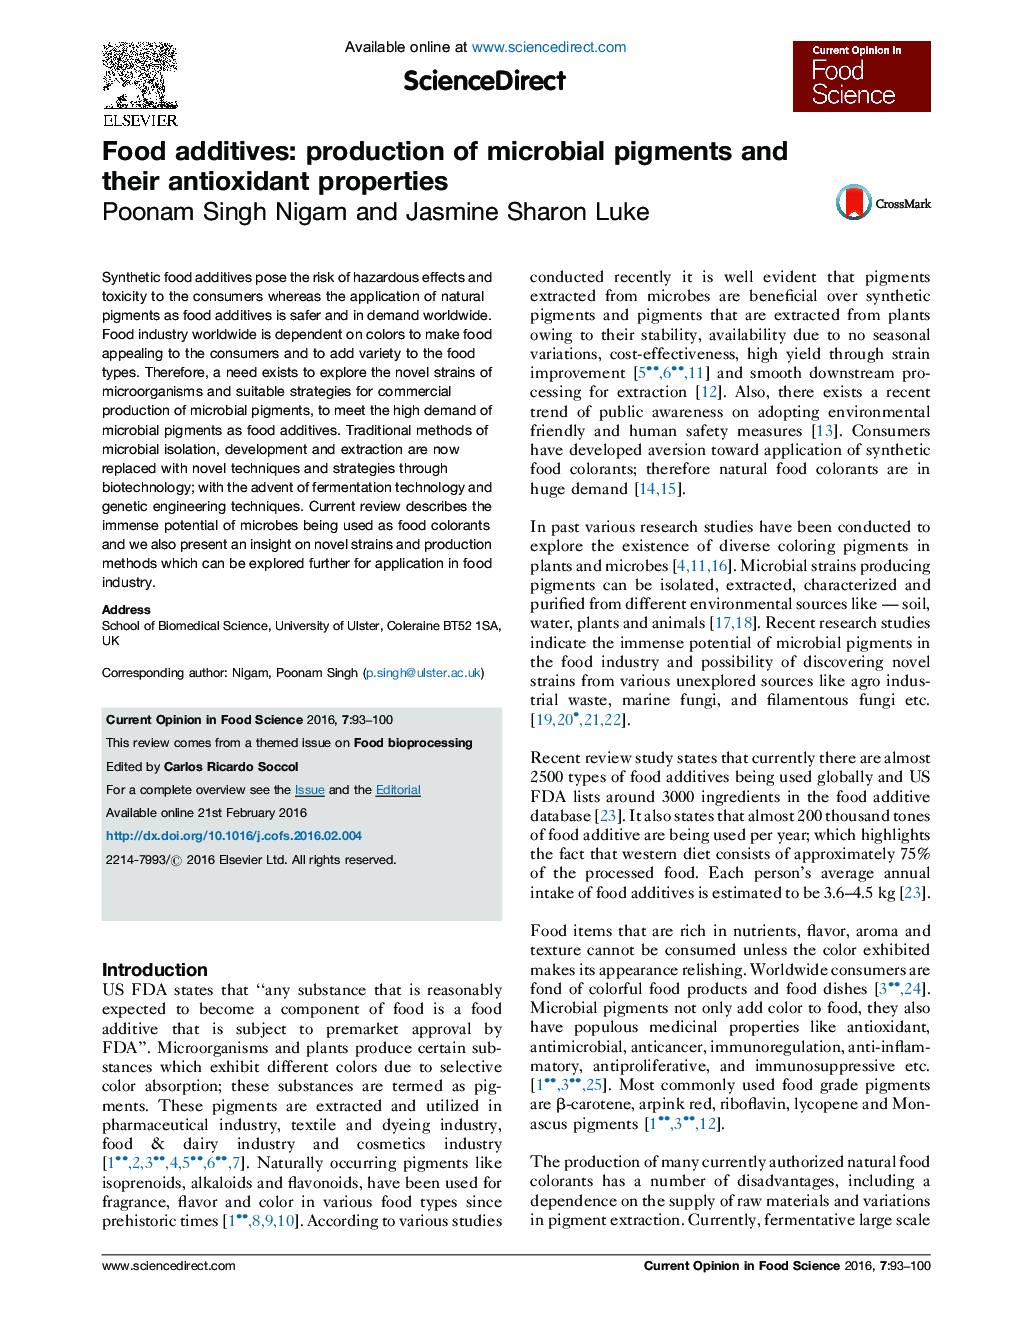 Food additives: production of microbial pigments and their antioxidant properties